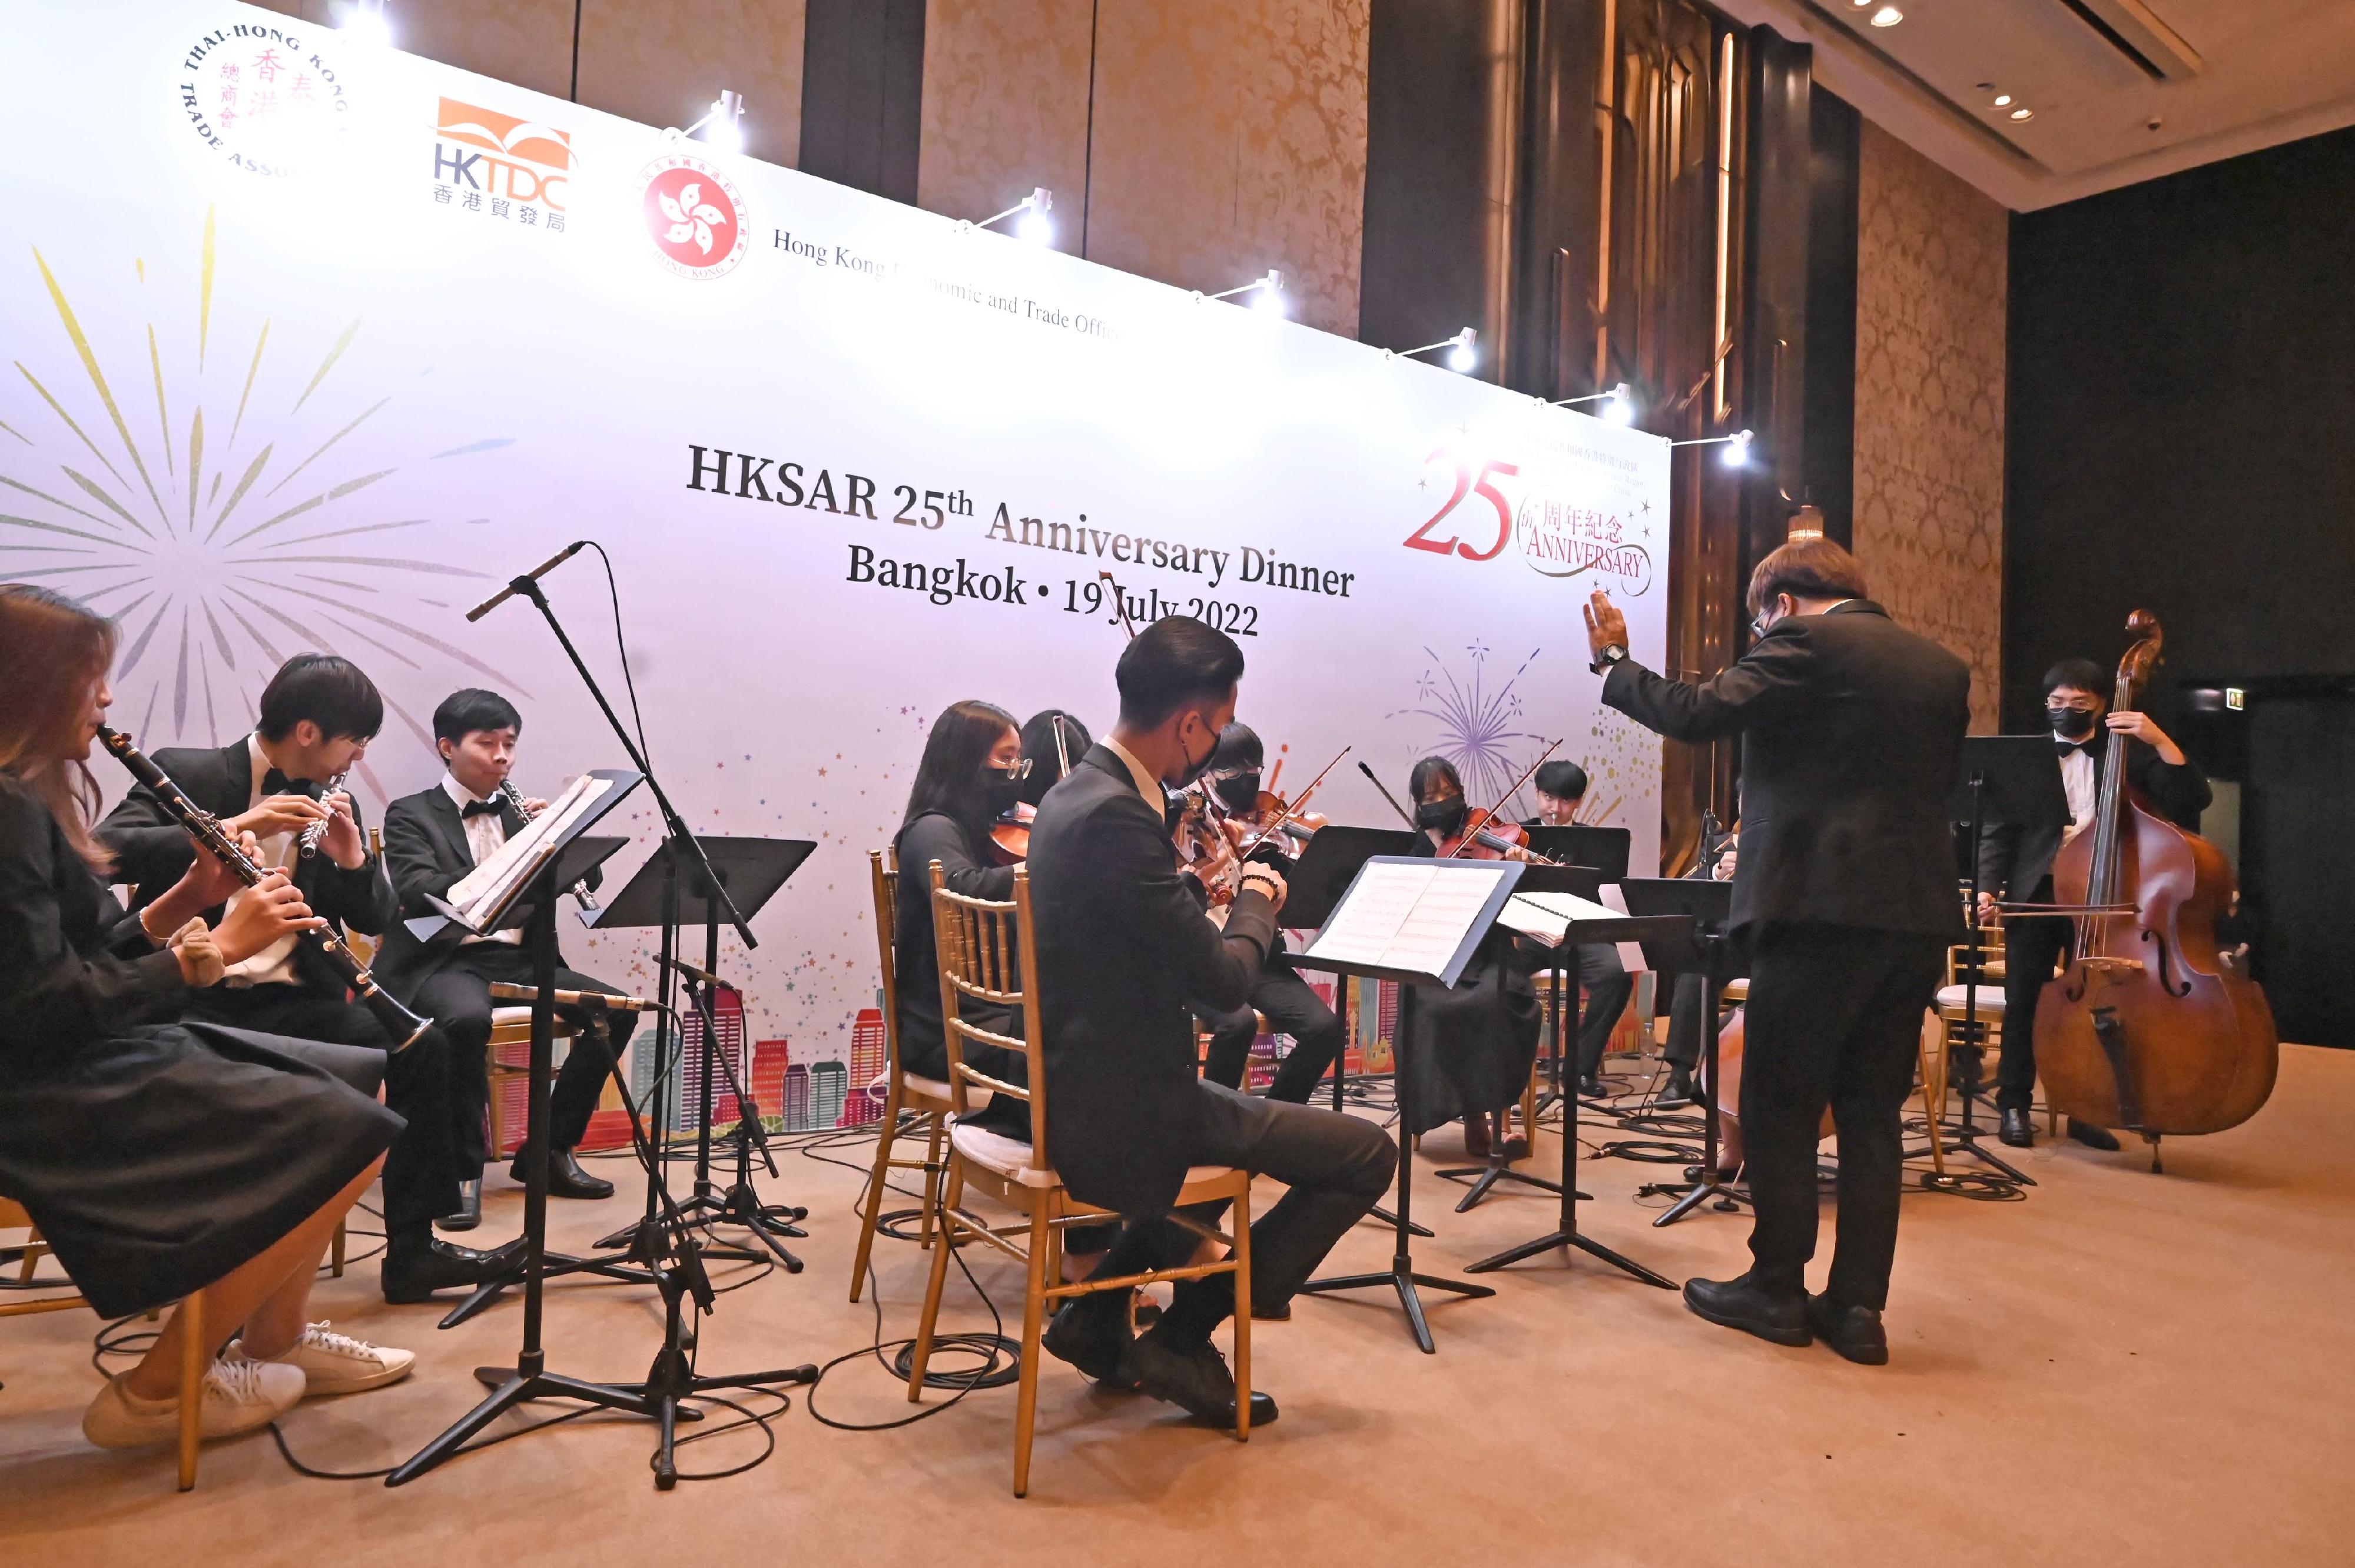 Highlight of the business dinner in Bangkok on July 19 was a performance by a group of talented Thai musicians from Mahidol University, who played a musical piece composed by Mr Keith Leung, a Hong Kong composer and awardee of the Hong Kong Scholarship for Excellence Scheme.